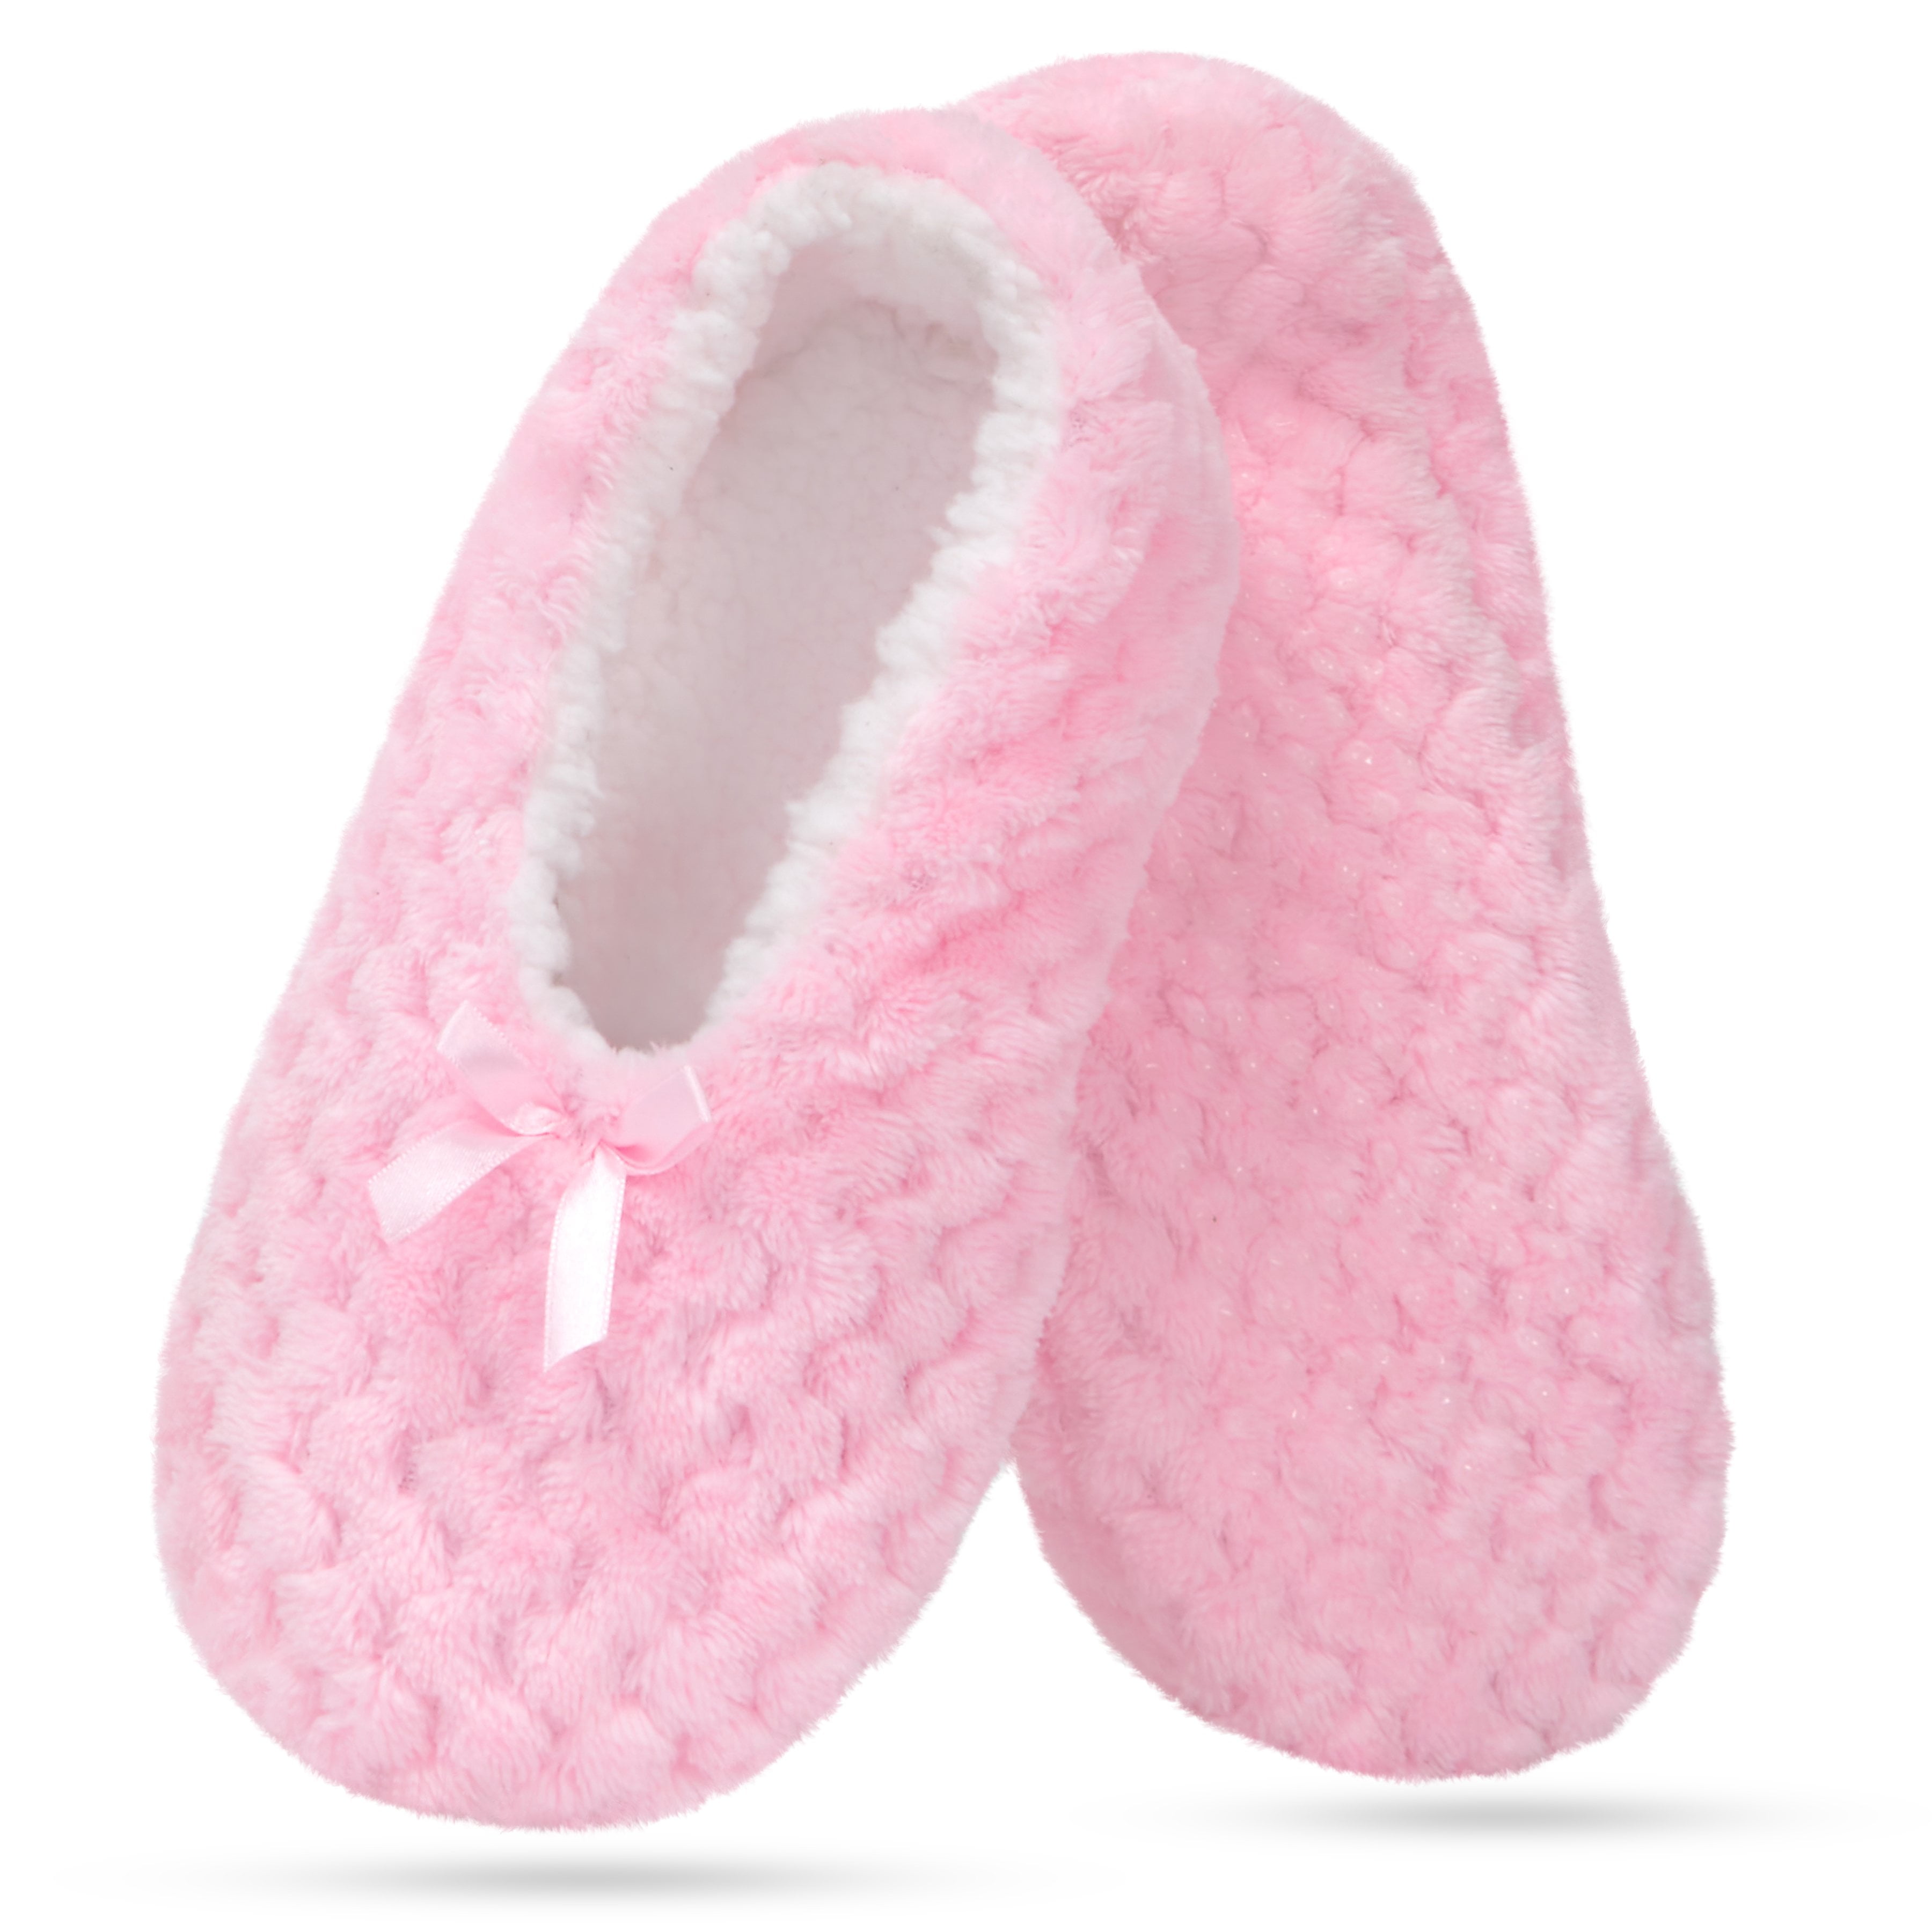 Cozy Memory Super Soft Warm Cozy Fuzzy Soft Touch Sleeper Slippers Non-Slip Sole Lined Socks for Women Girls Home Spa Hotel 